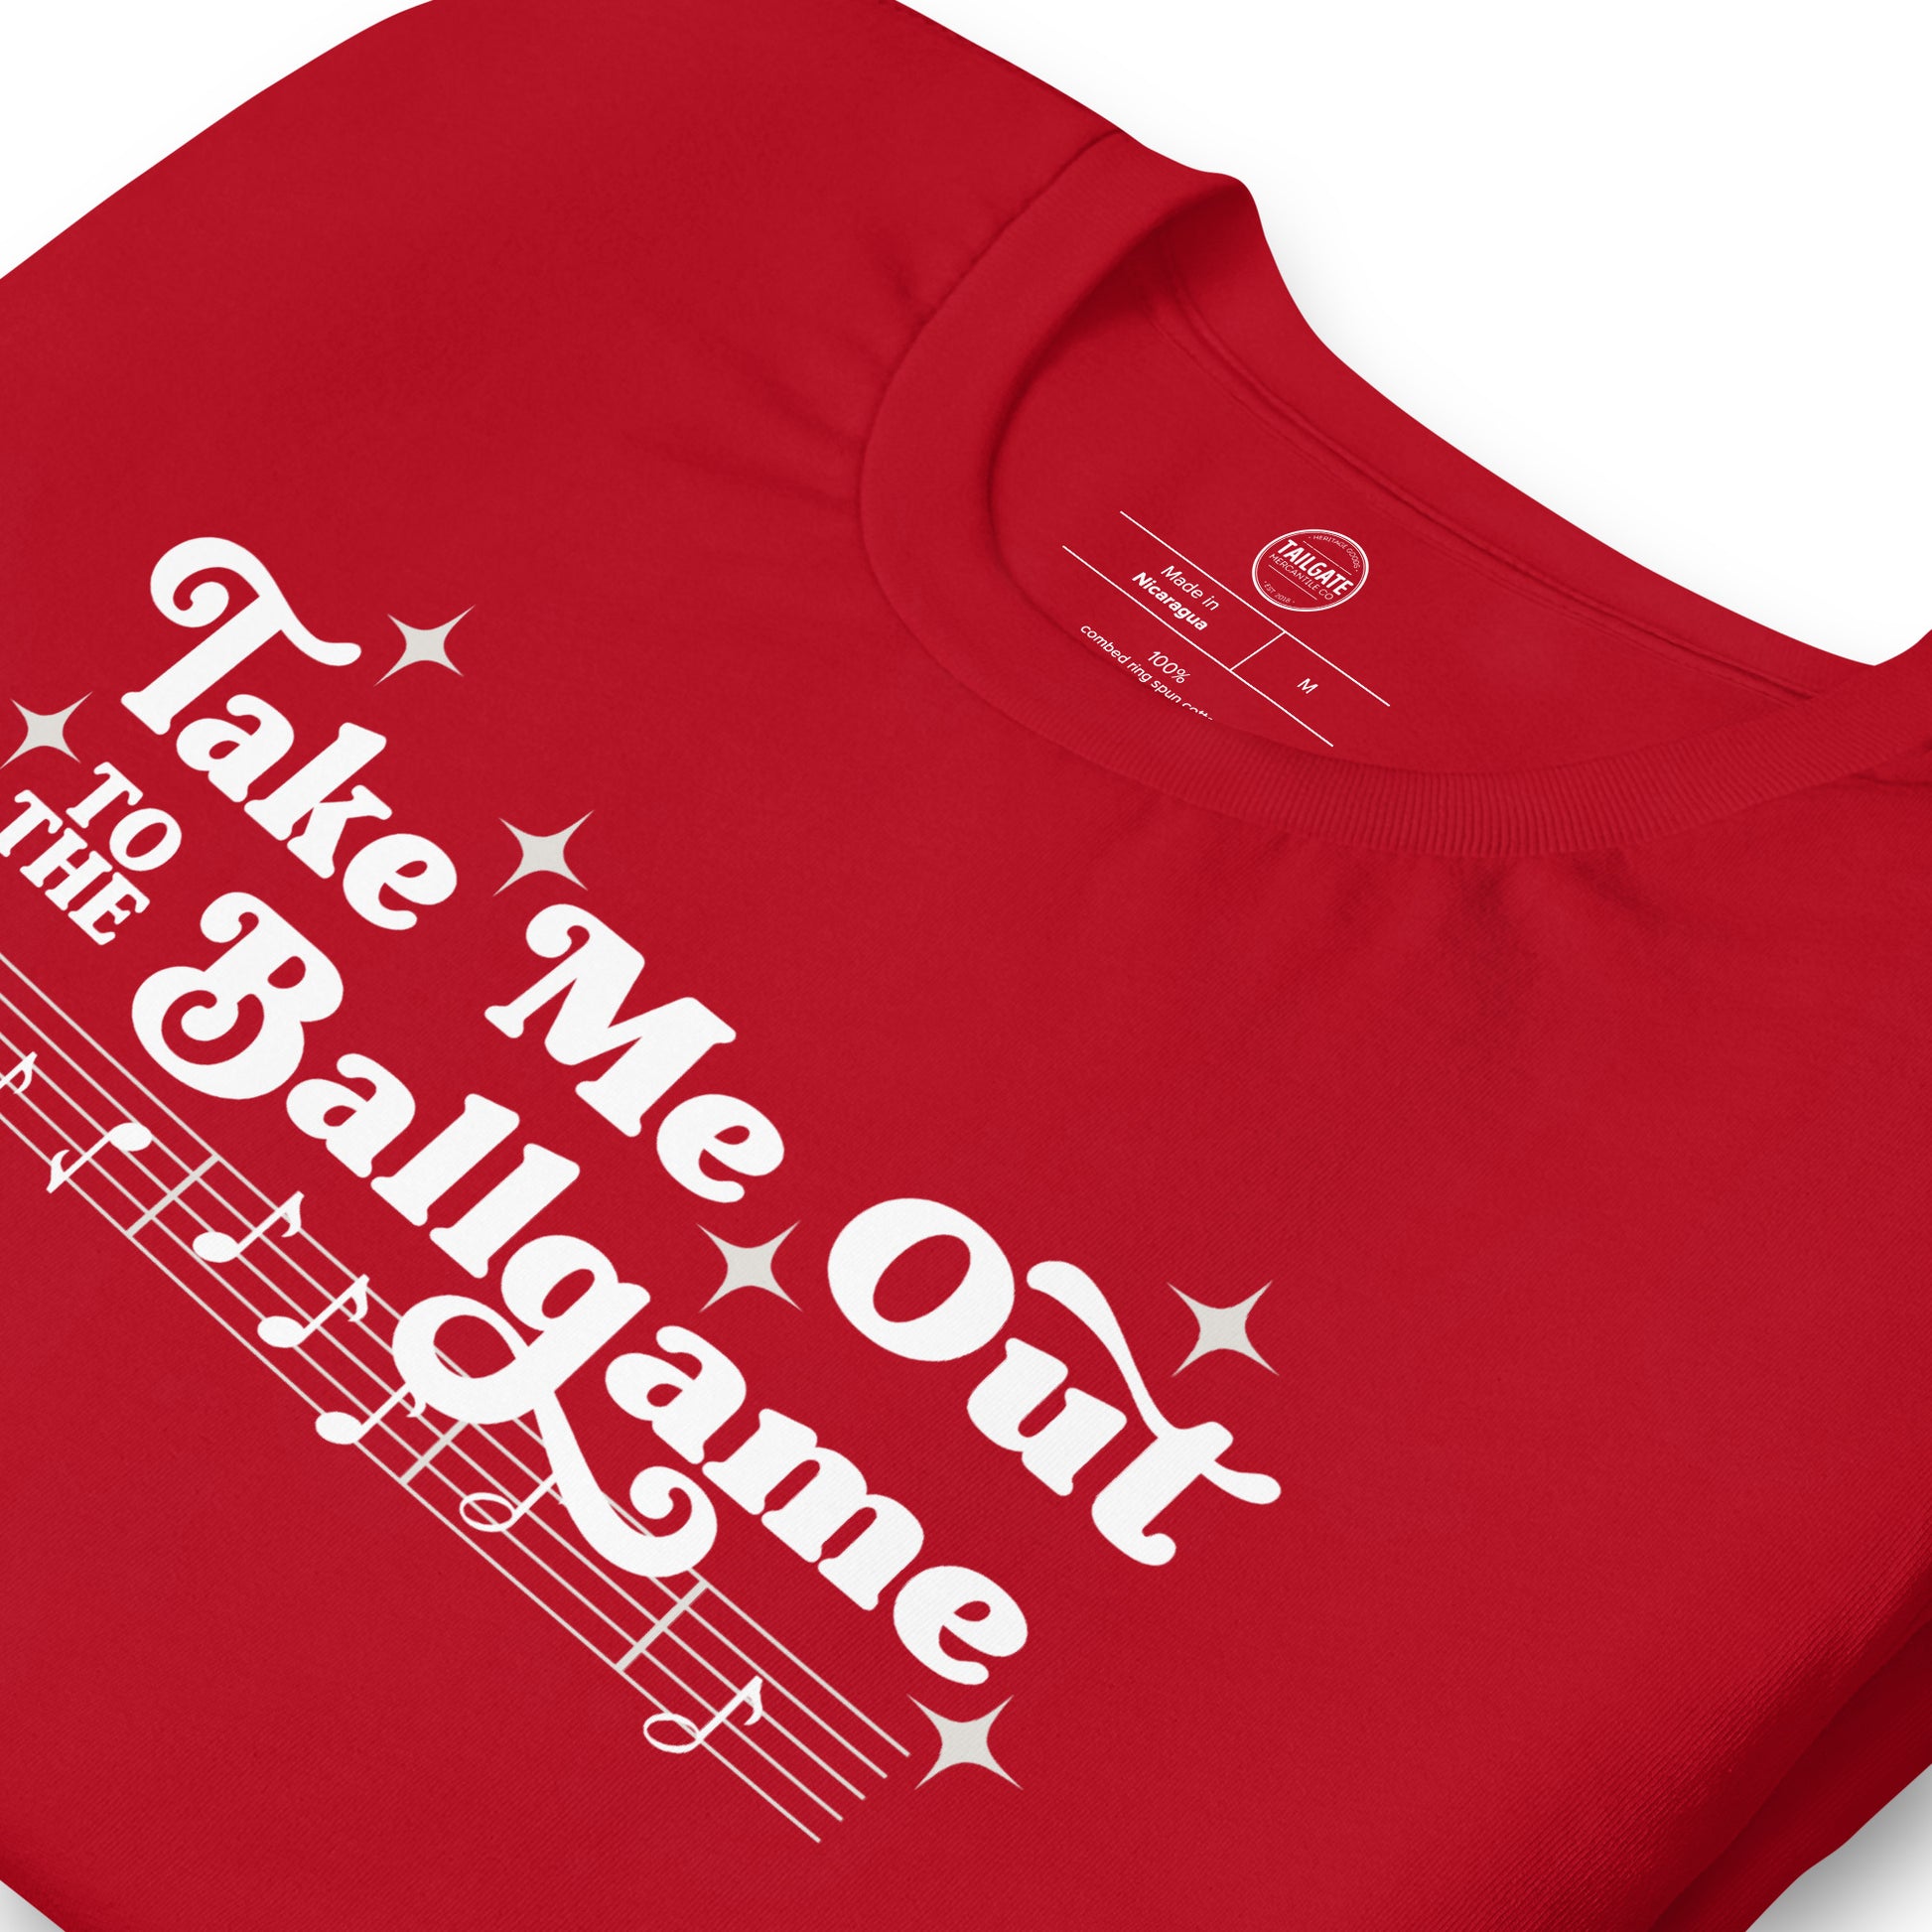 Close up image of red t-shirt with design of "Take Me Out to the Ballgame" with coordinating musical notes in white located on centre chest. This design is exclusive to Tailgate Mercantile and available only online.